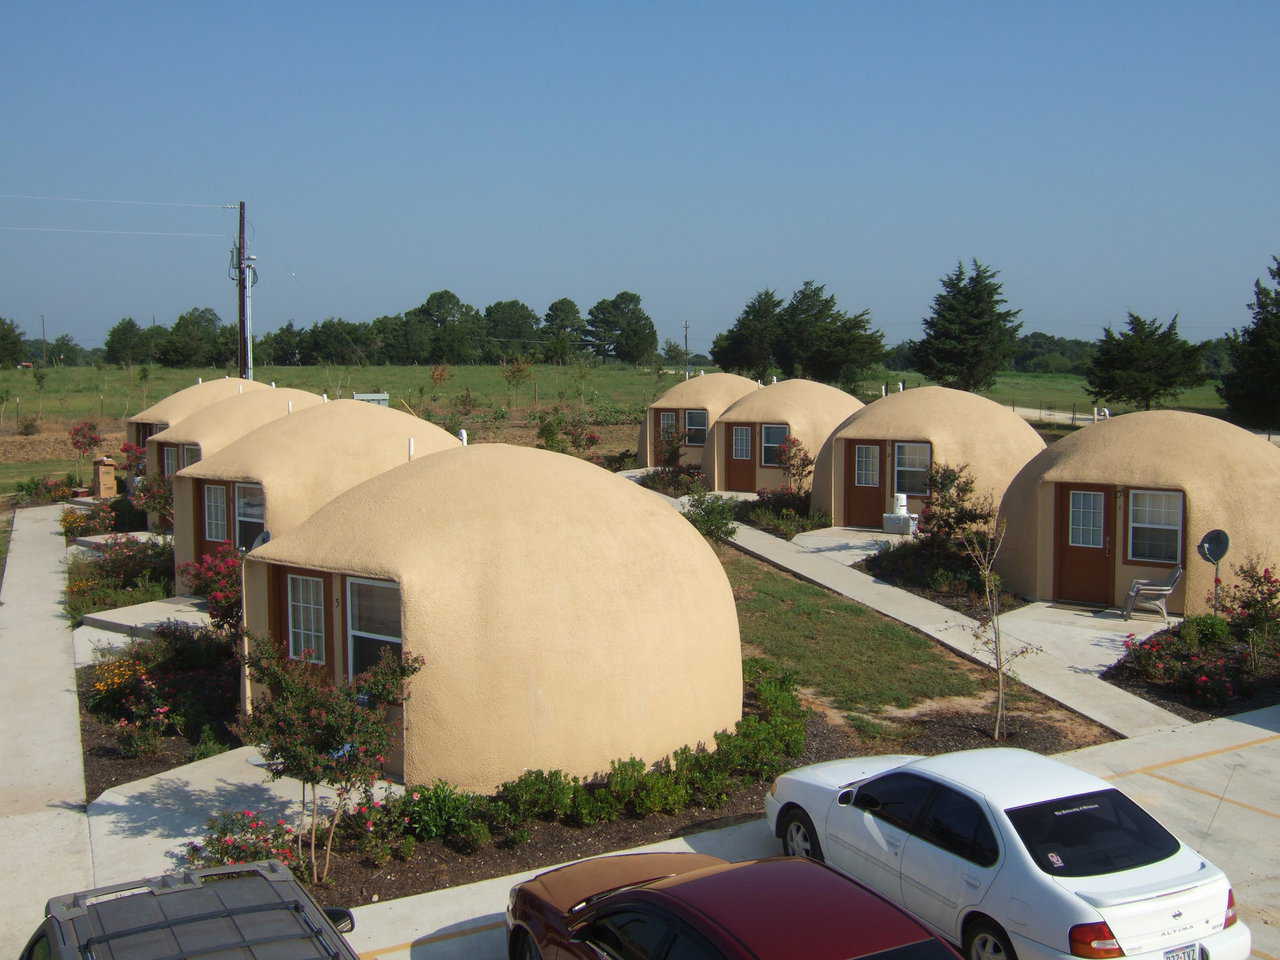 The Inn Place — With the completion of construction in Phase I, the Inn Place had eight Monolithic Dome units available for rental.